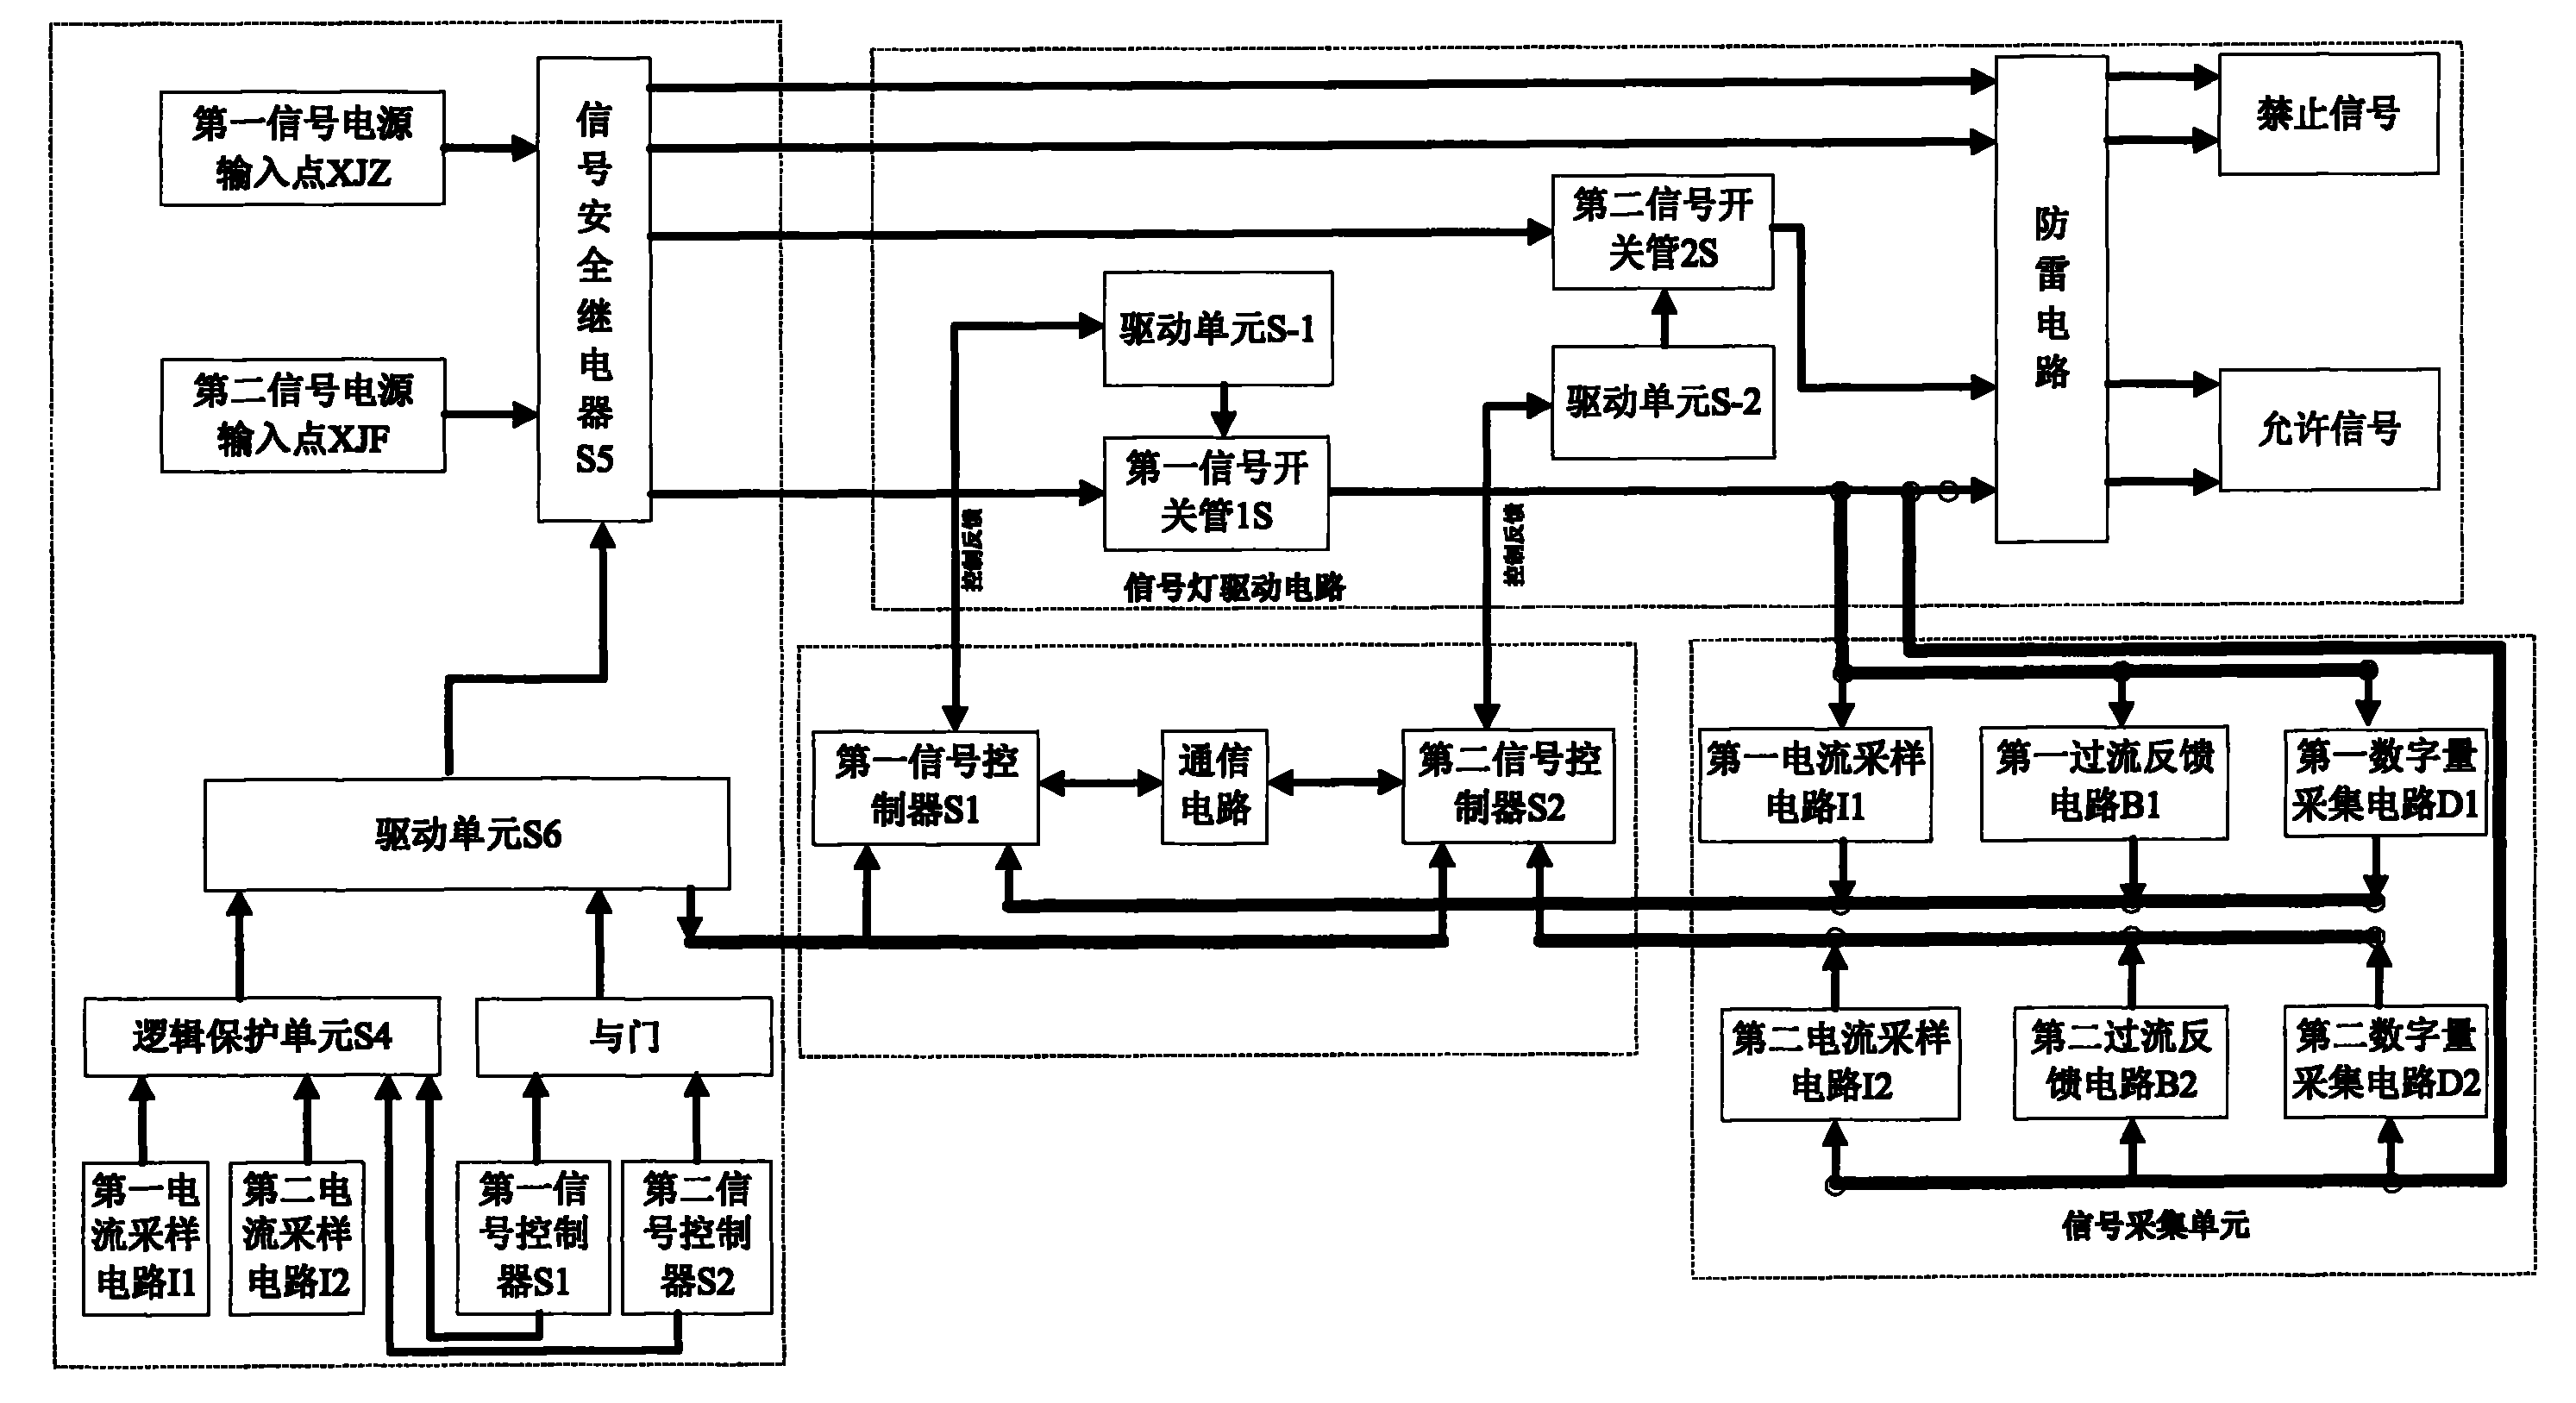 Signal execution unit of computer interlock system and working method thereof